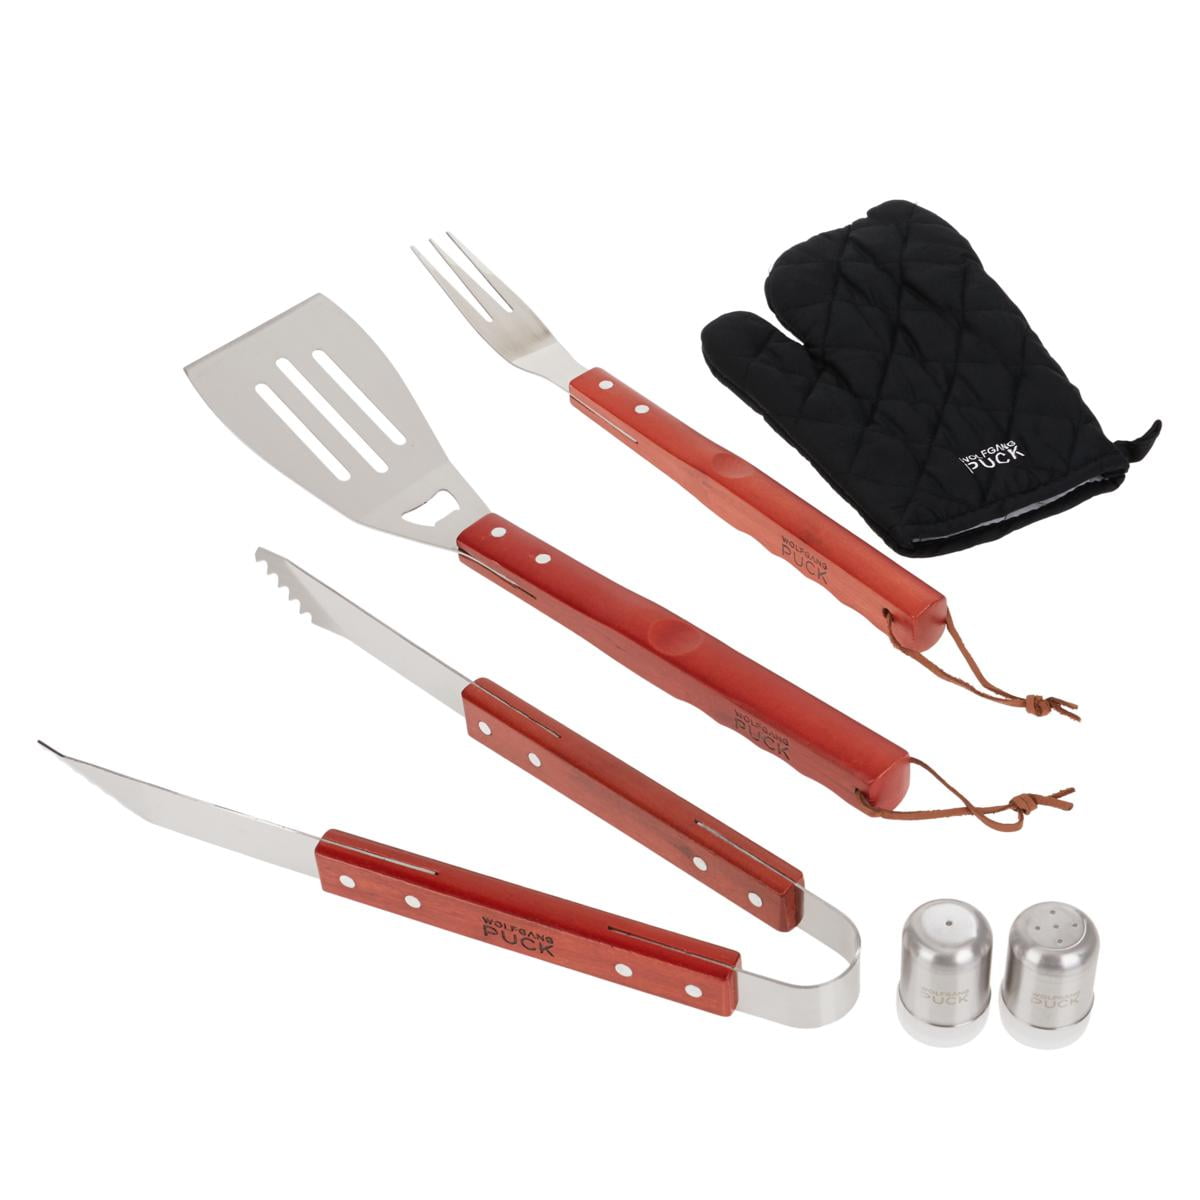 Wolfgang Puck 7 Piece Cutlery Knife Set with Wood Block includes scissors